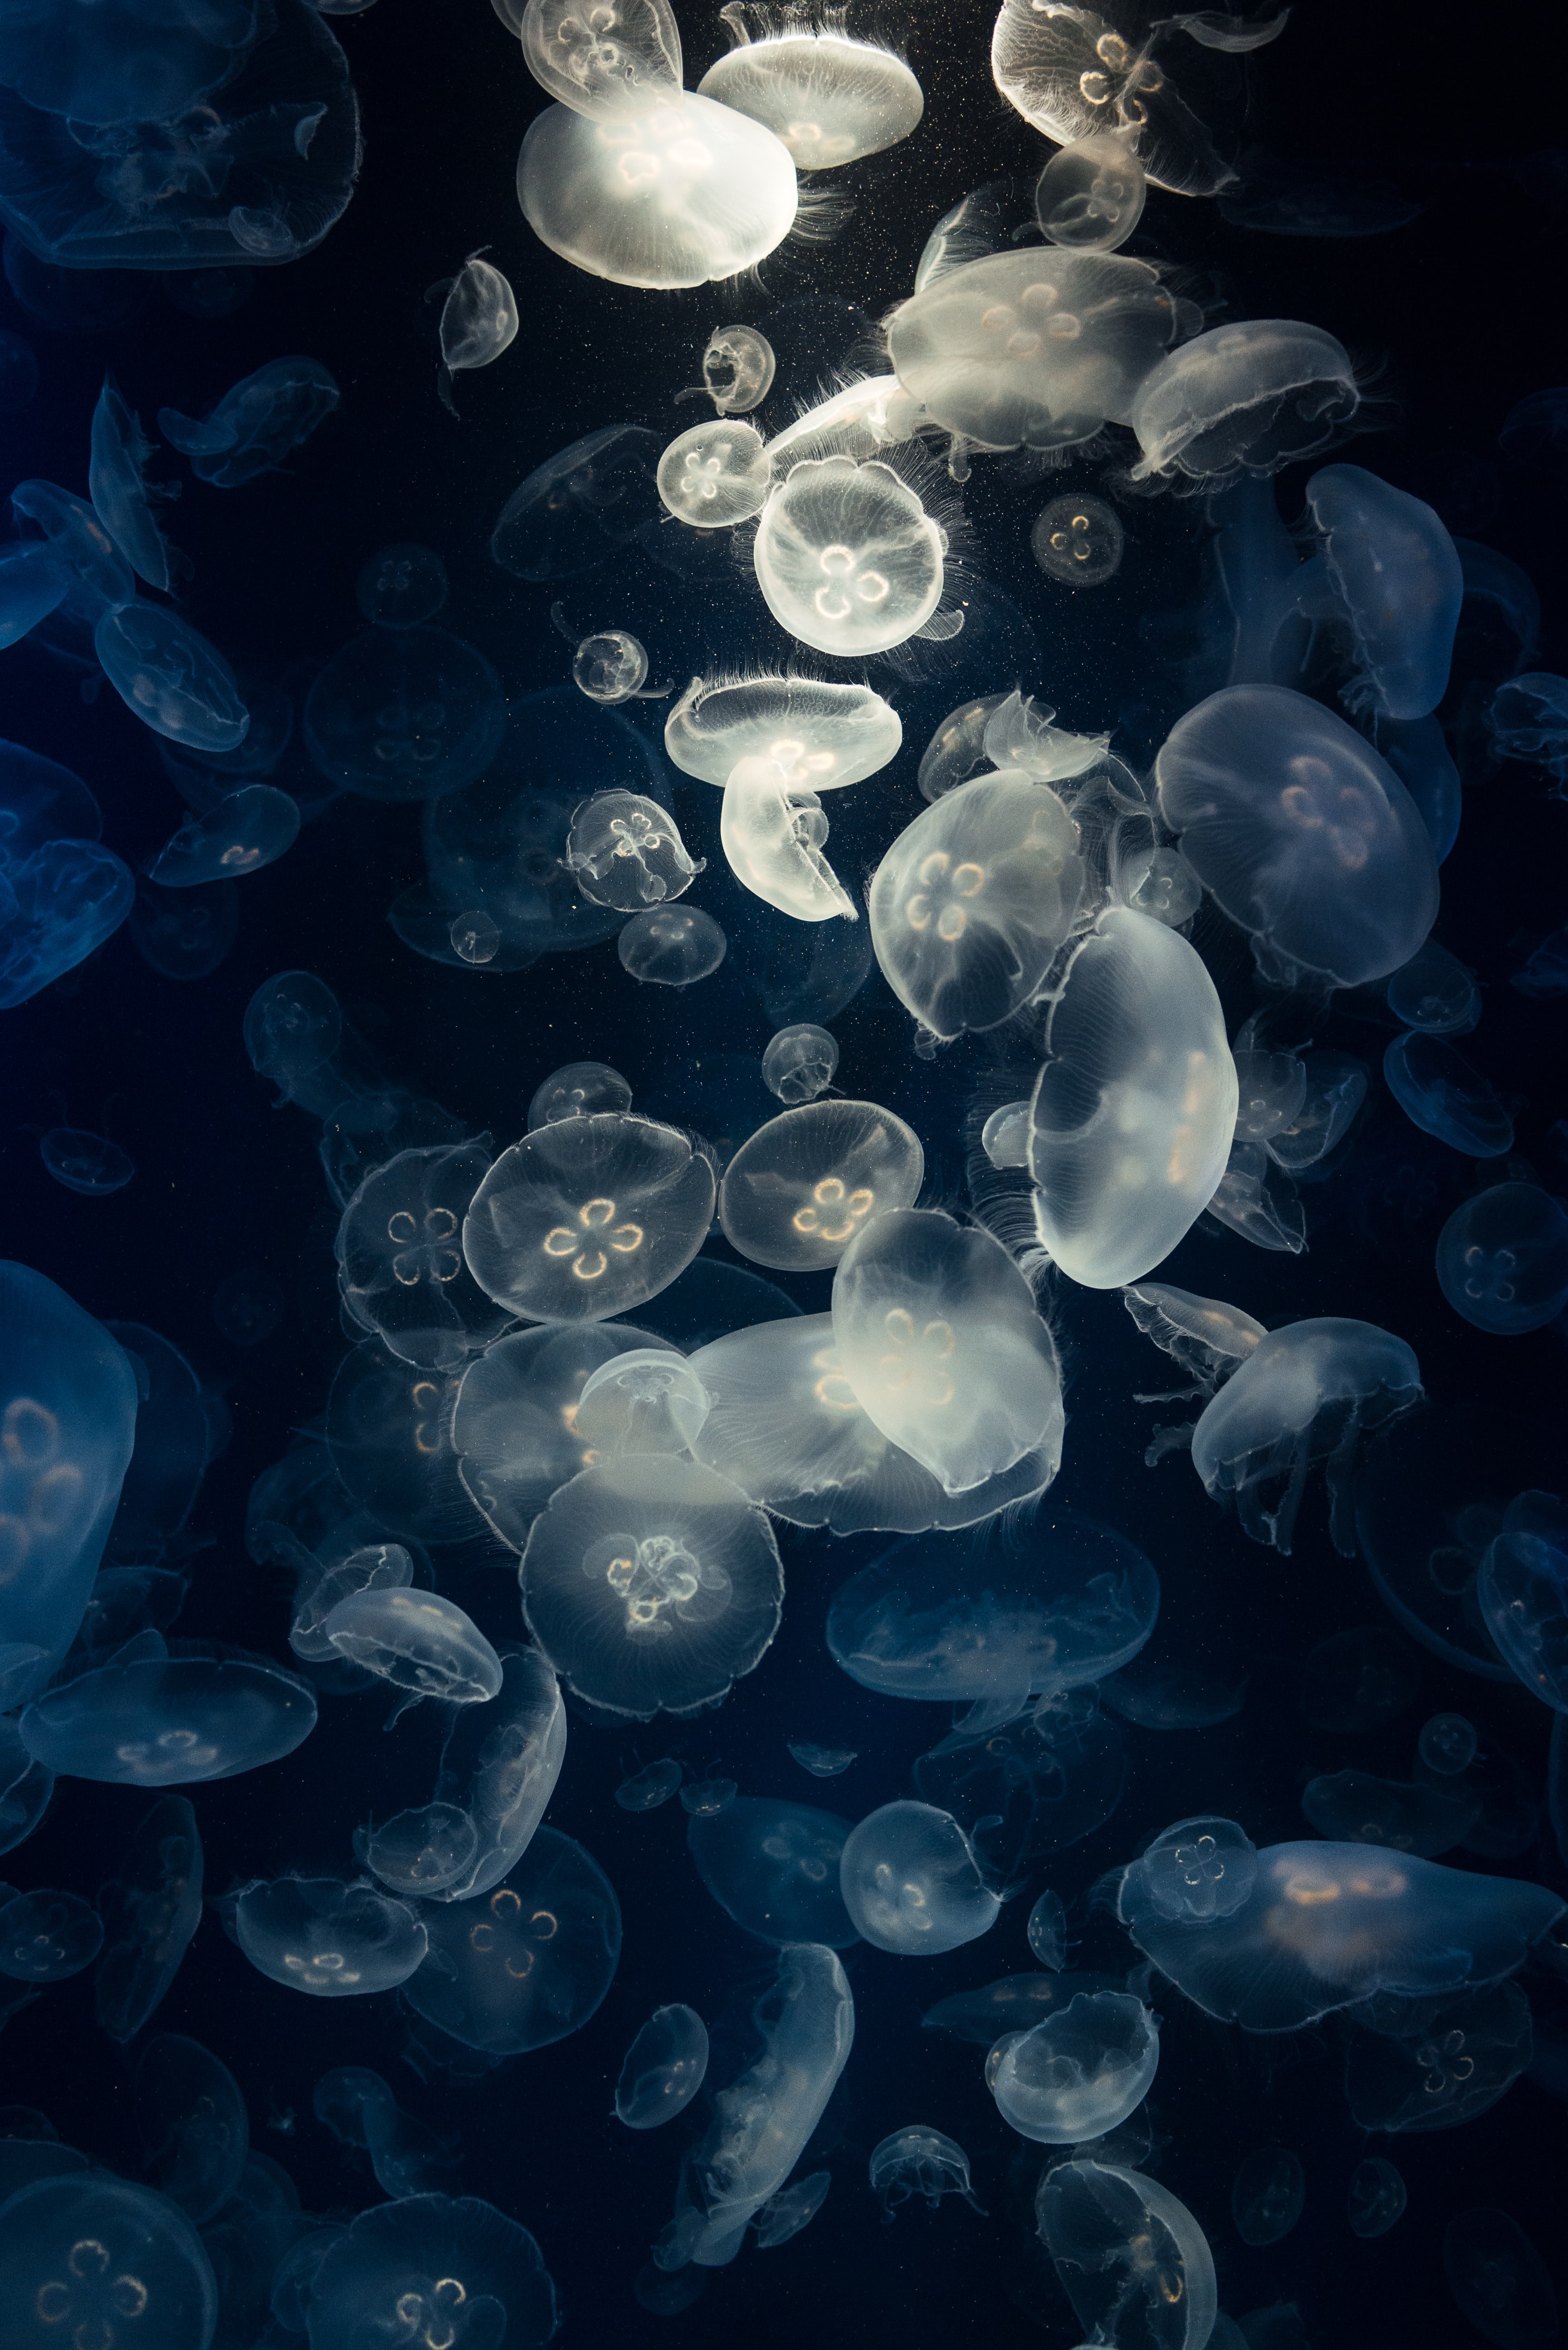 111147 download wallpaper jellyfish, animals, glow, creatures, under water, underwater screensavers and pictures for free